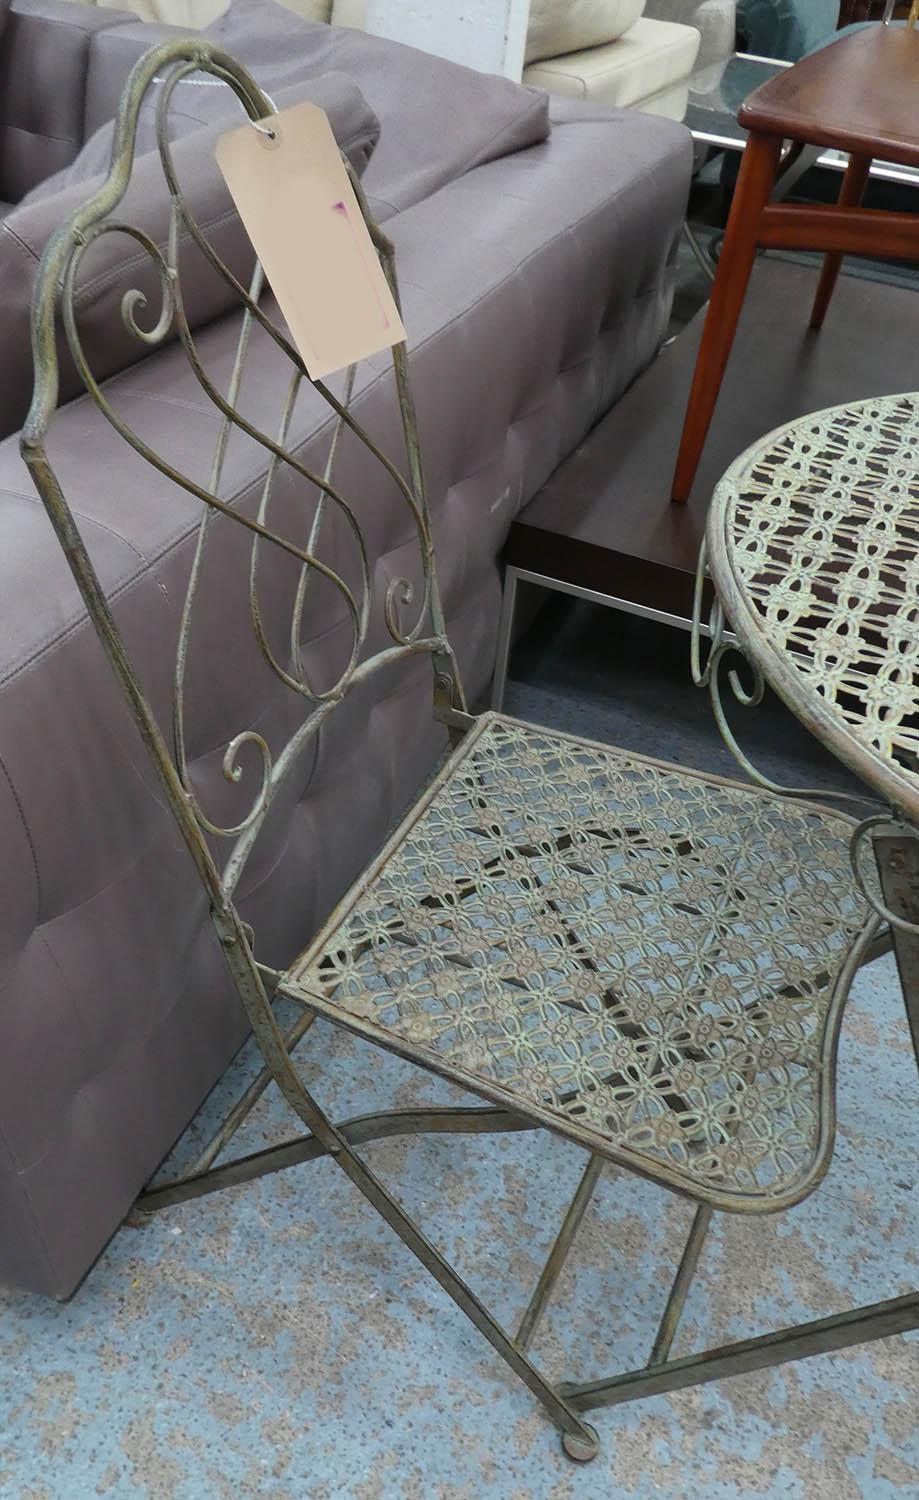 GARDEN DINING SET, including table 74cm x 60cm diam and two chairs 91cm H, 1950's French style. (3) - Image 3 of 3